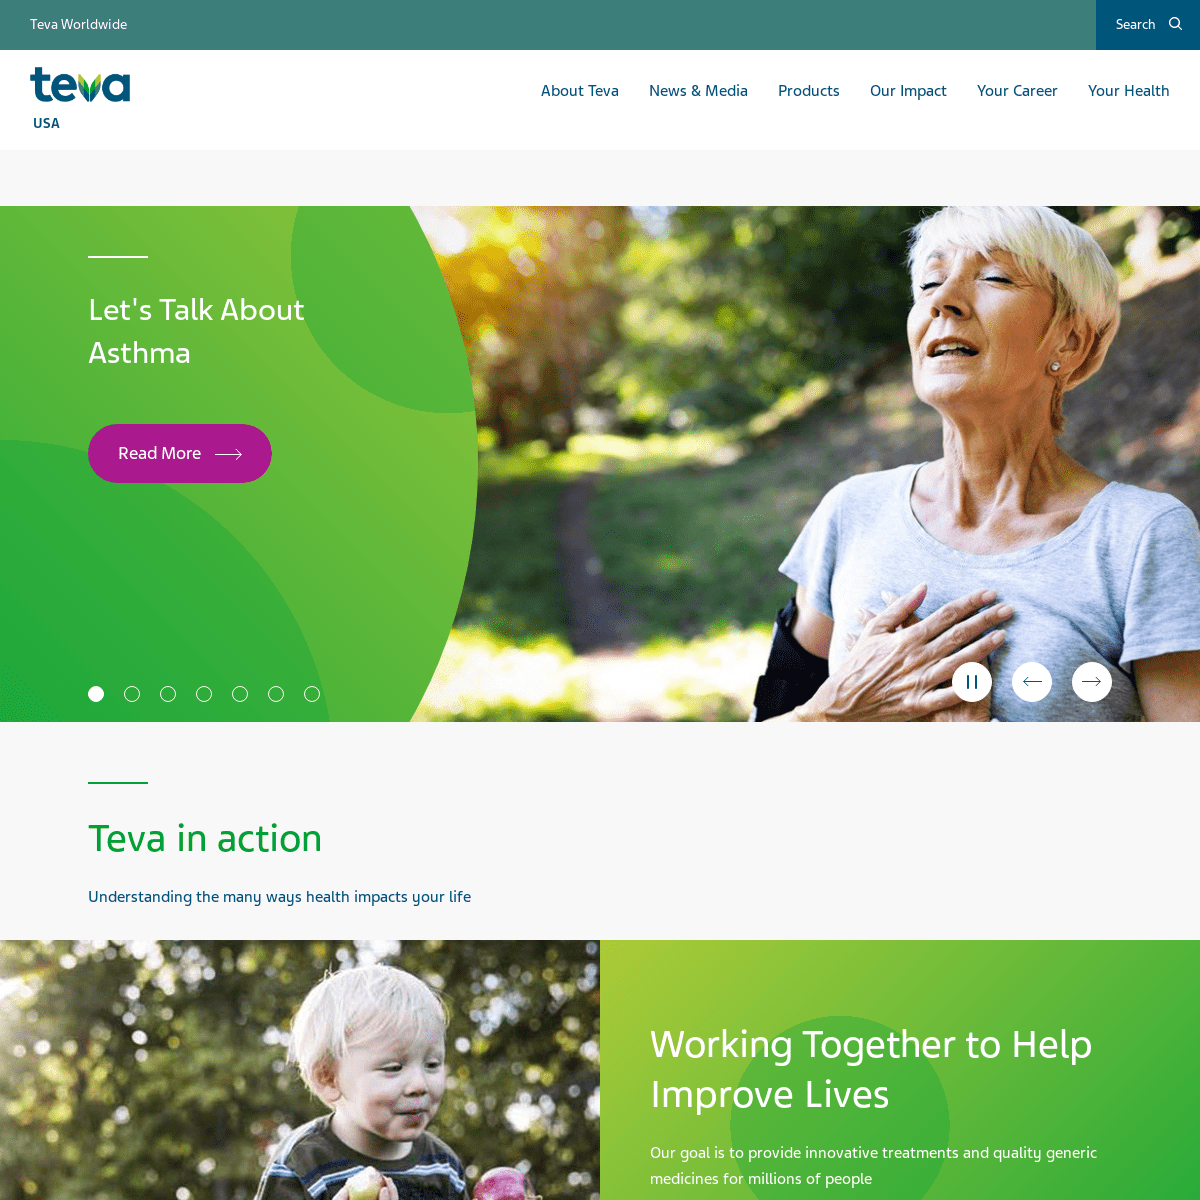 A complete backup of https://tevausa.com